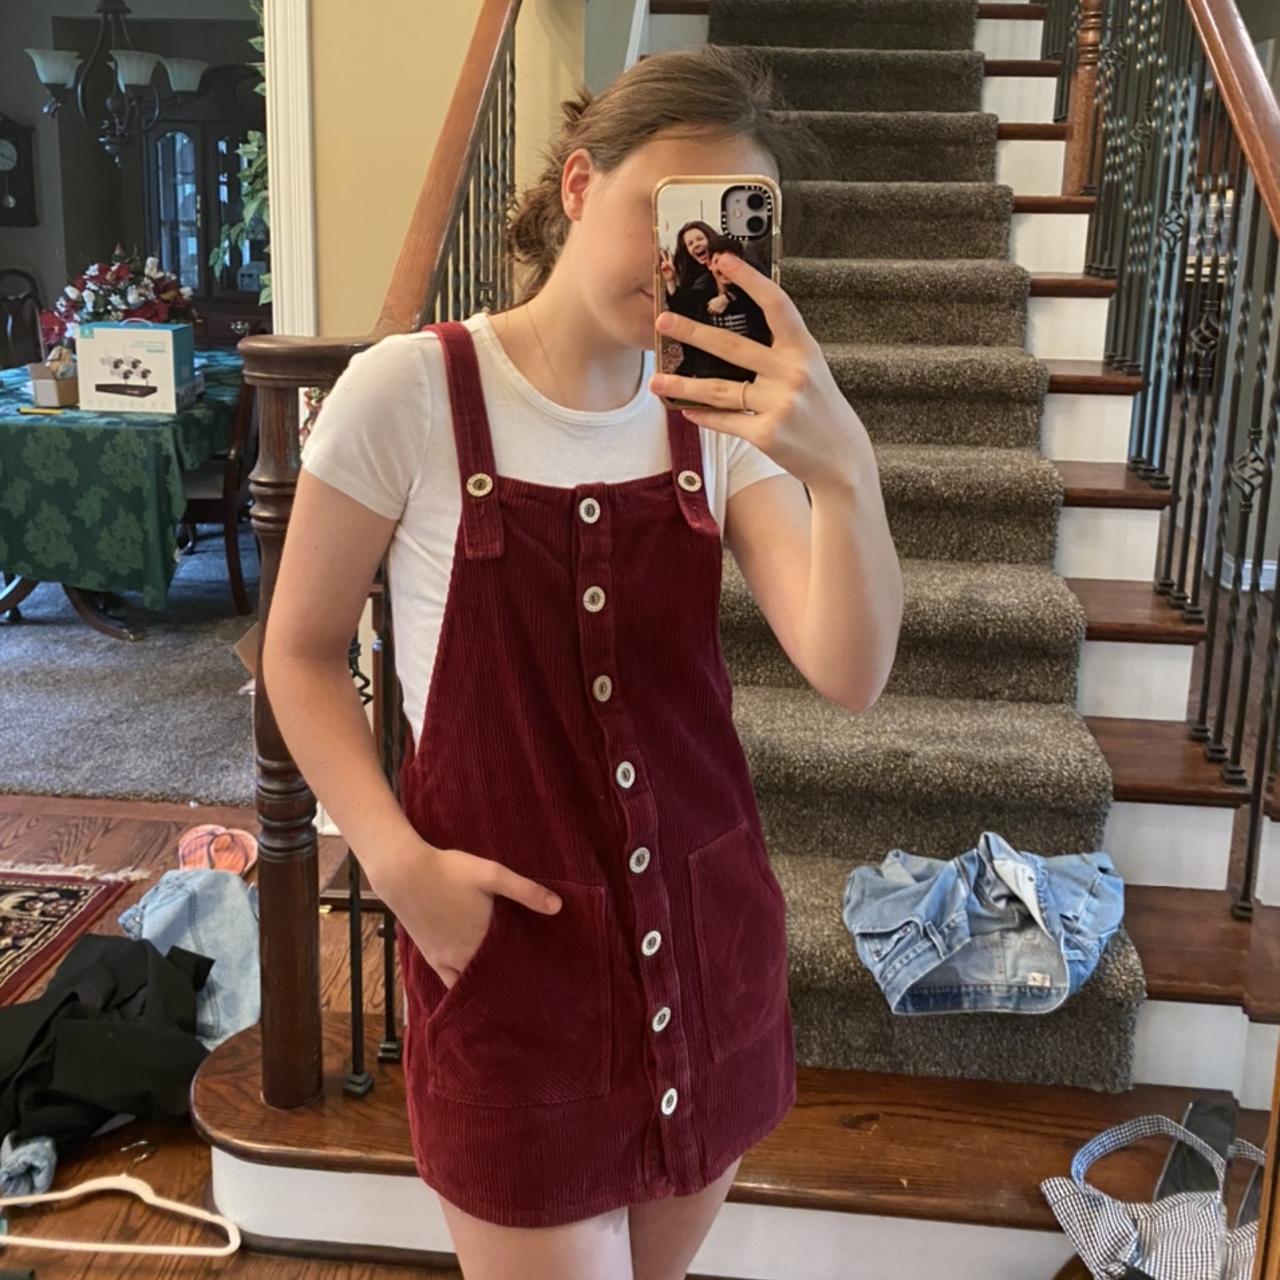 RIGO Maroon Twill Skirt Dungaree  Favorite outfit, Casual dress outfits,  Pretty outfits